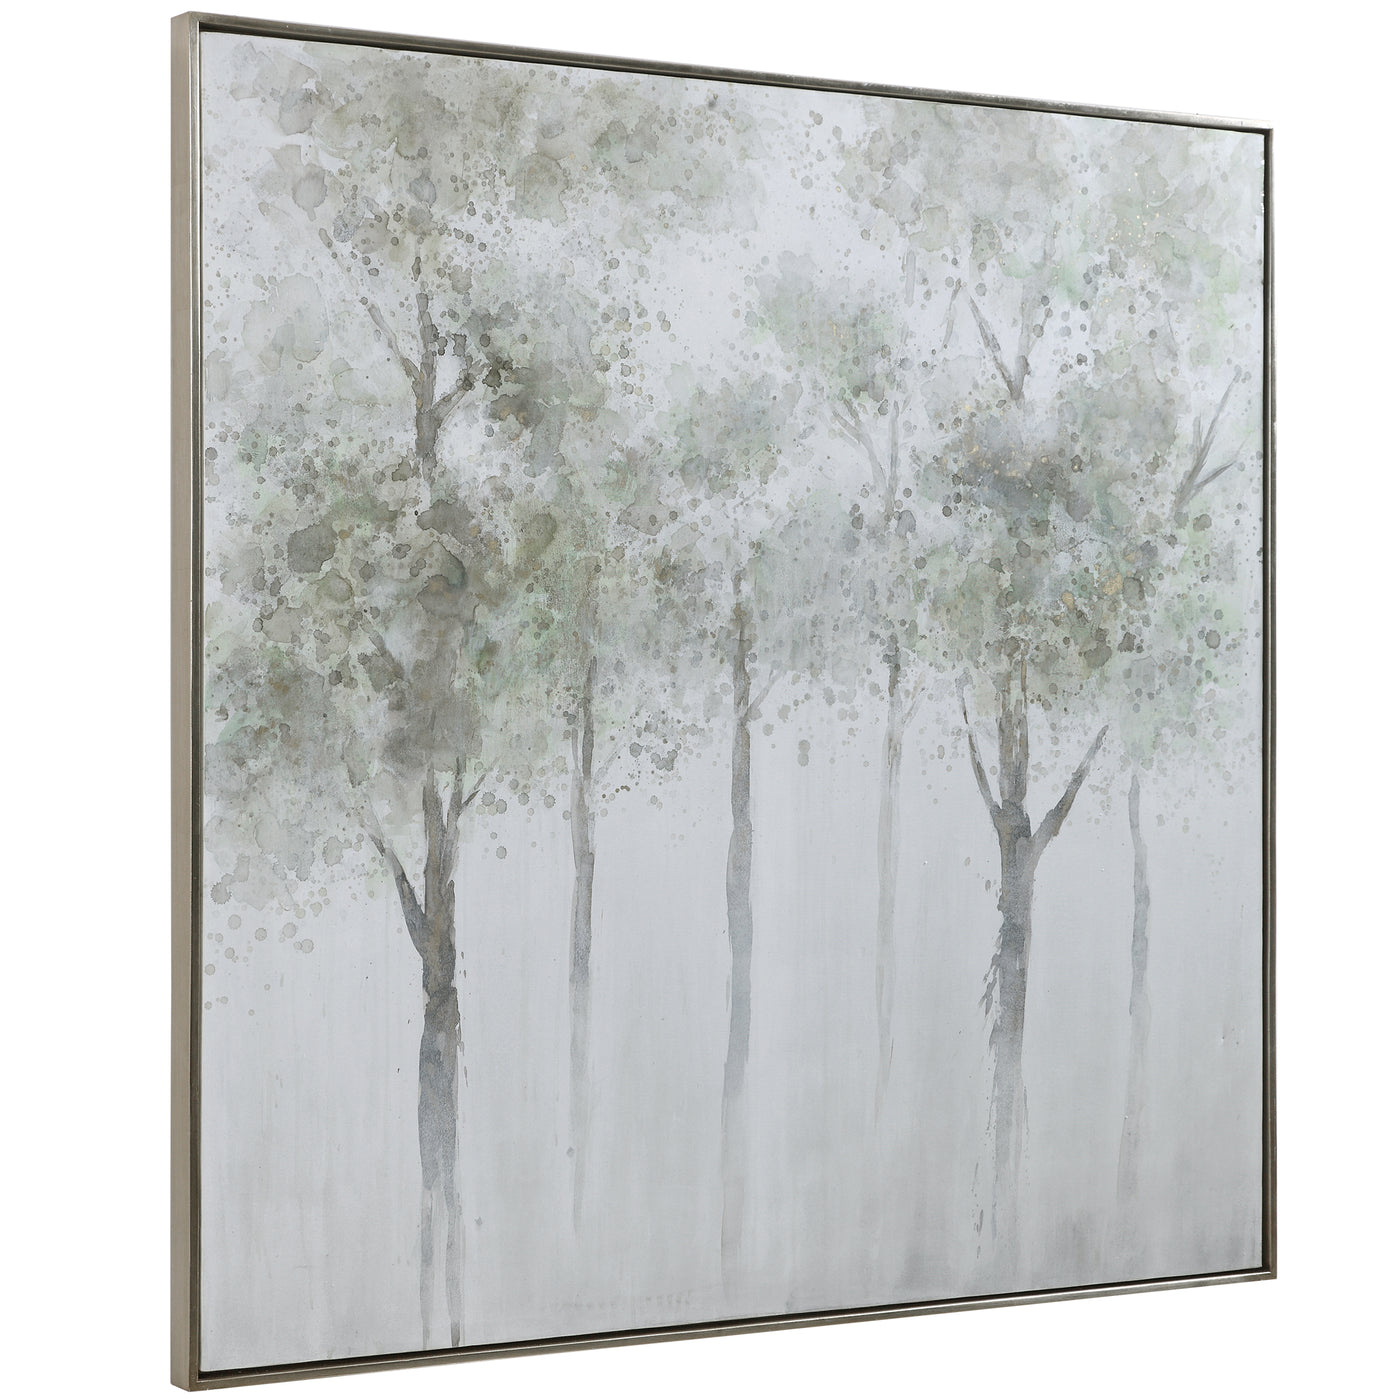 Hand Painted Forest Scene On Canvas Showcases A Watercolor Style With Soft Sage Green, Yellow And Gray Tones And A Silver ...